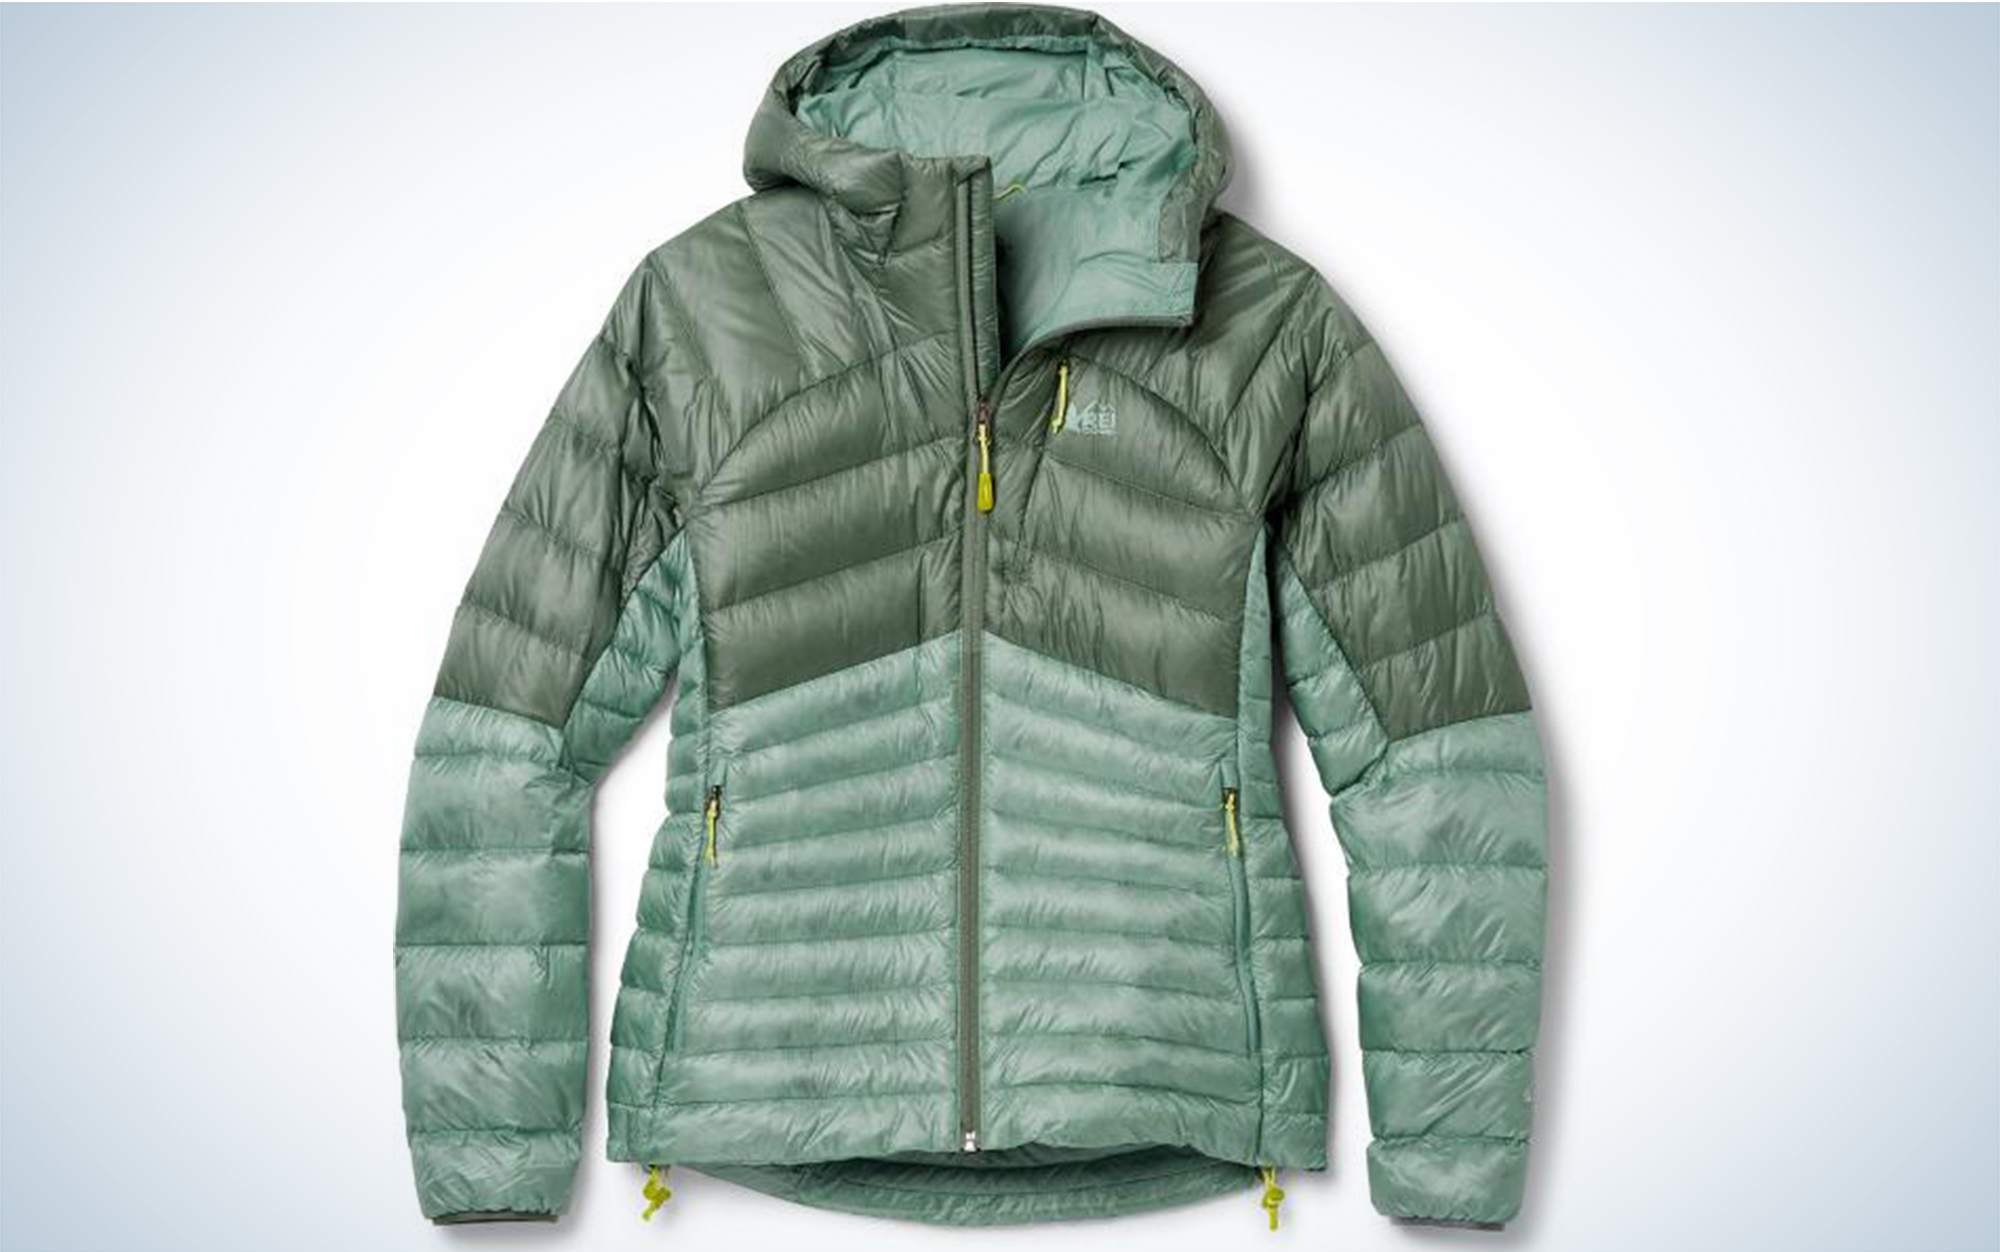 The REI Co-op Magma 850 Down Hoodie is the best value hiking jacket.